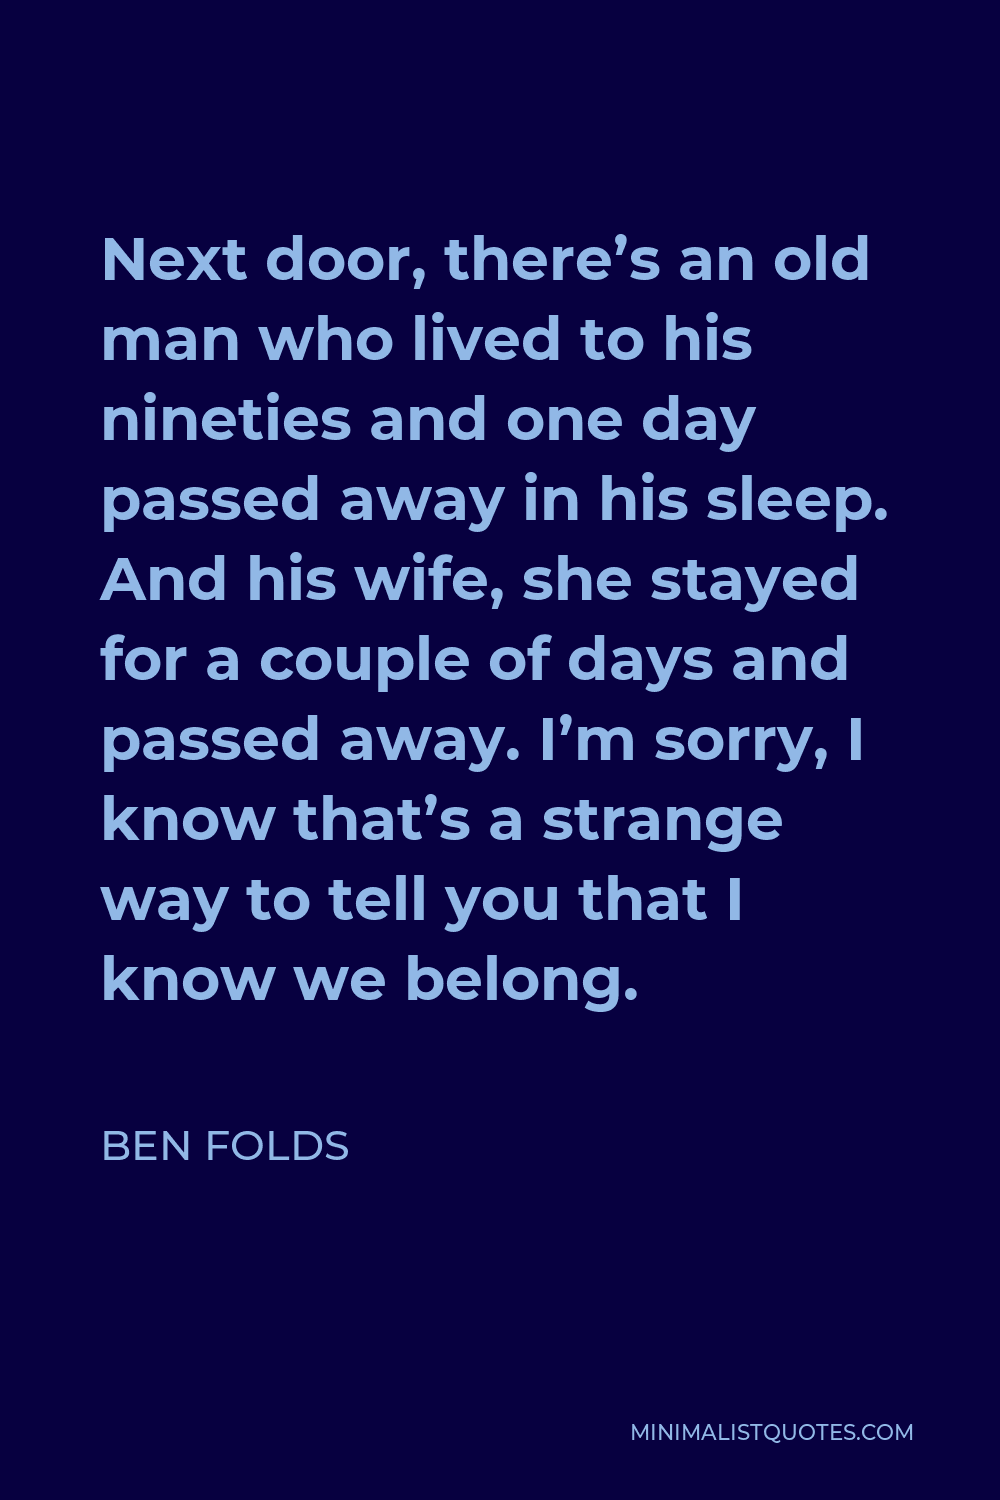 Ben Folds Quote - Next door, there’s an old man who lived to his nineties and one day passed away in his sleep. And his wife, she stayed for a couple of days and passed away. I’m sorry, I know that’s a strange way to tell you that I know we belong.